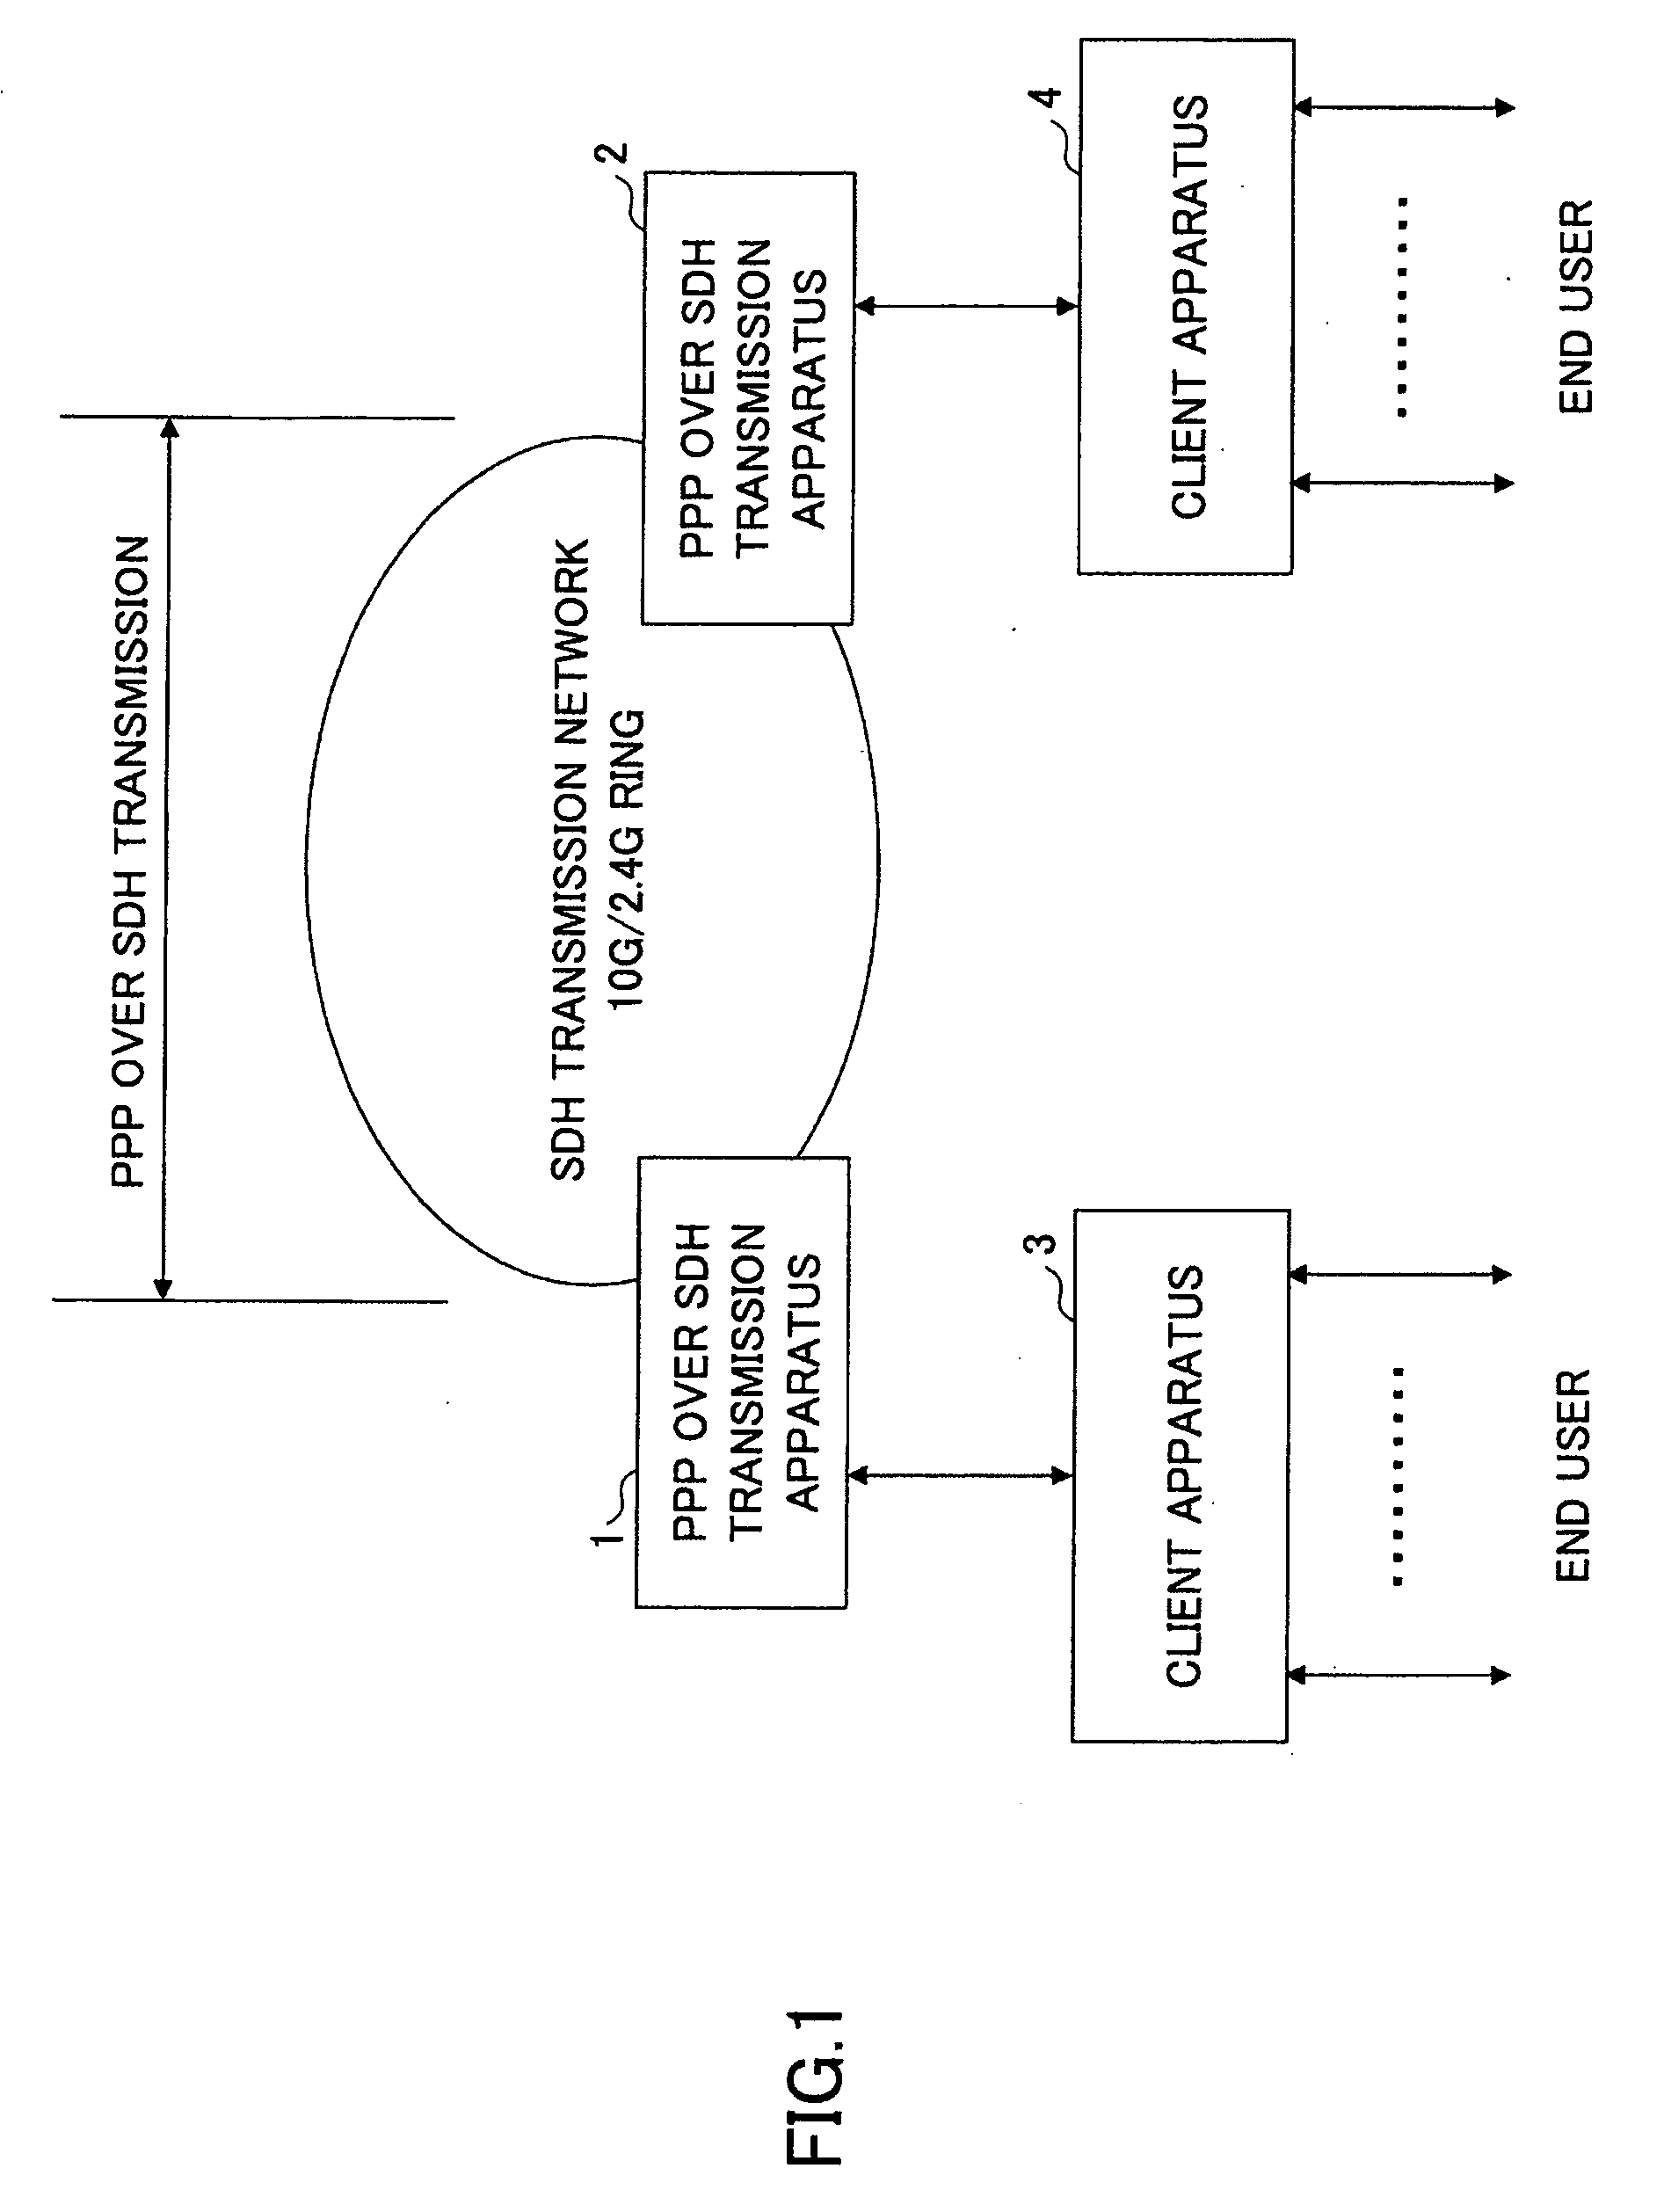 Method and apparatus for transmitting data from asynchronous network via synchronous network